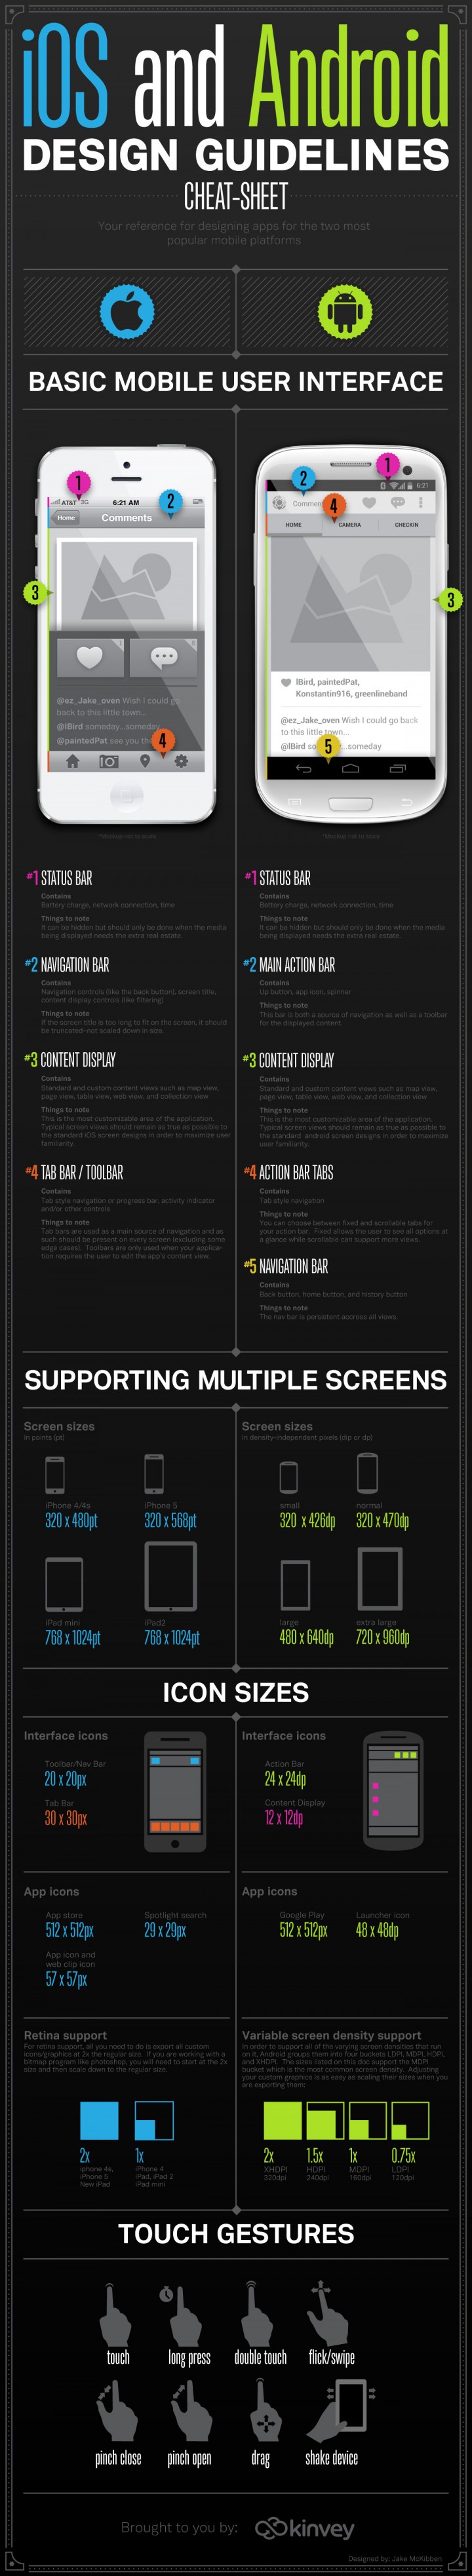 Android-Cheat-Sheet-for-Designers-03